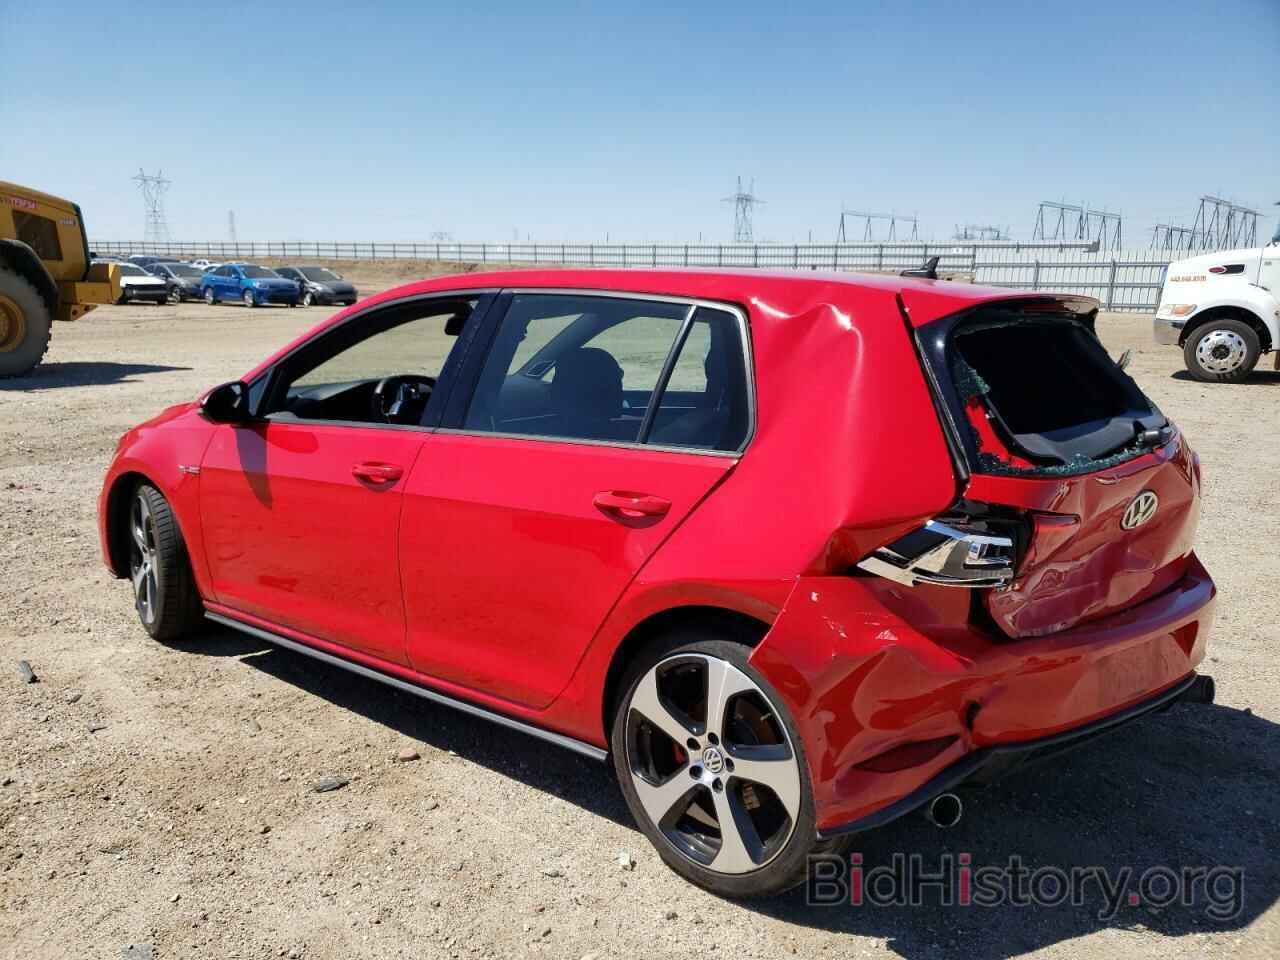 Report 3VW4T7AU0FM028936 VOLKSWAGEN GTI 2015 RED GAS - price and damage ...